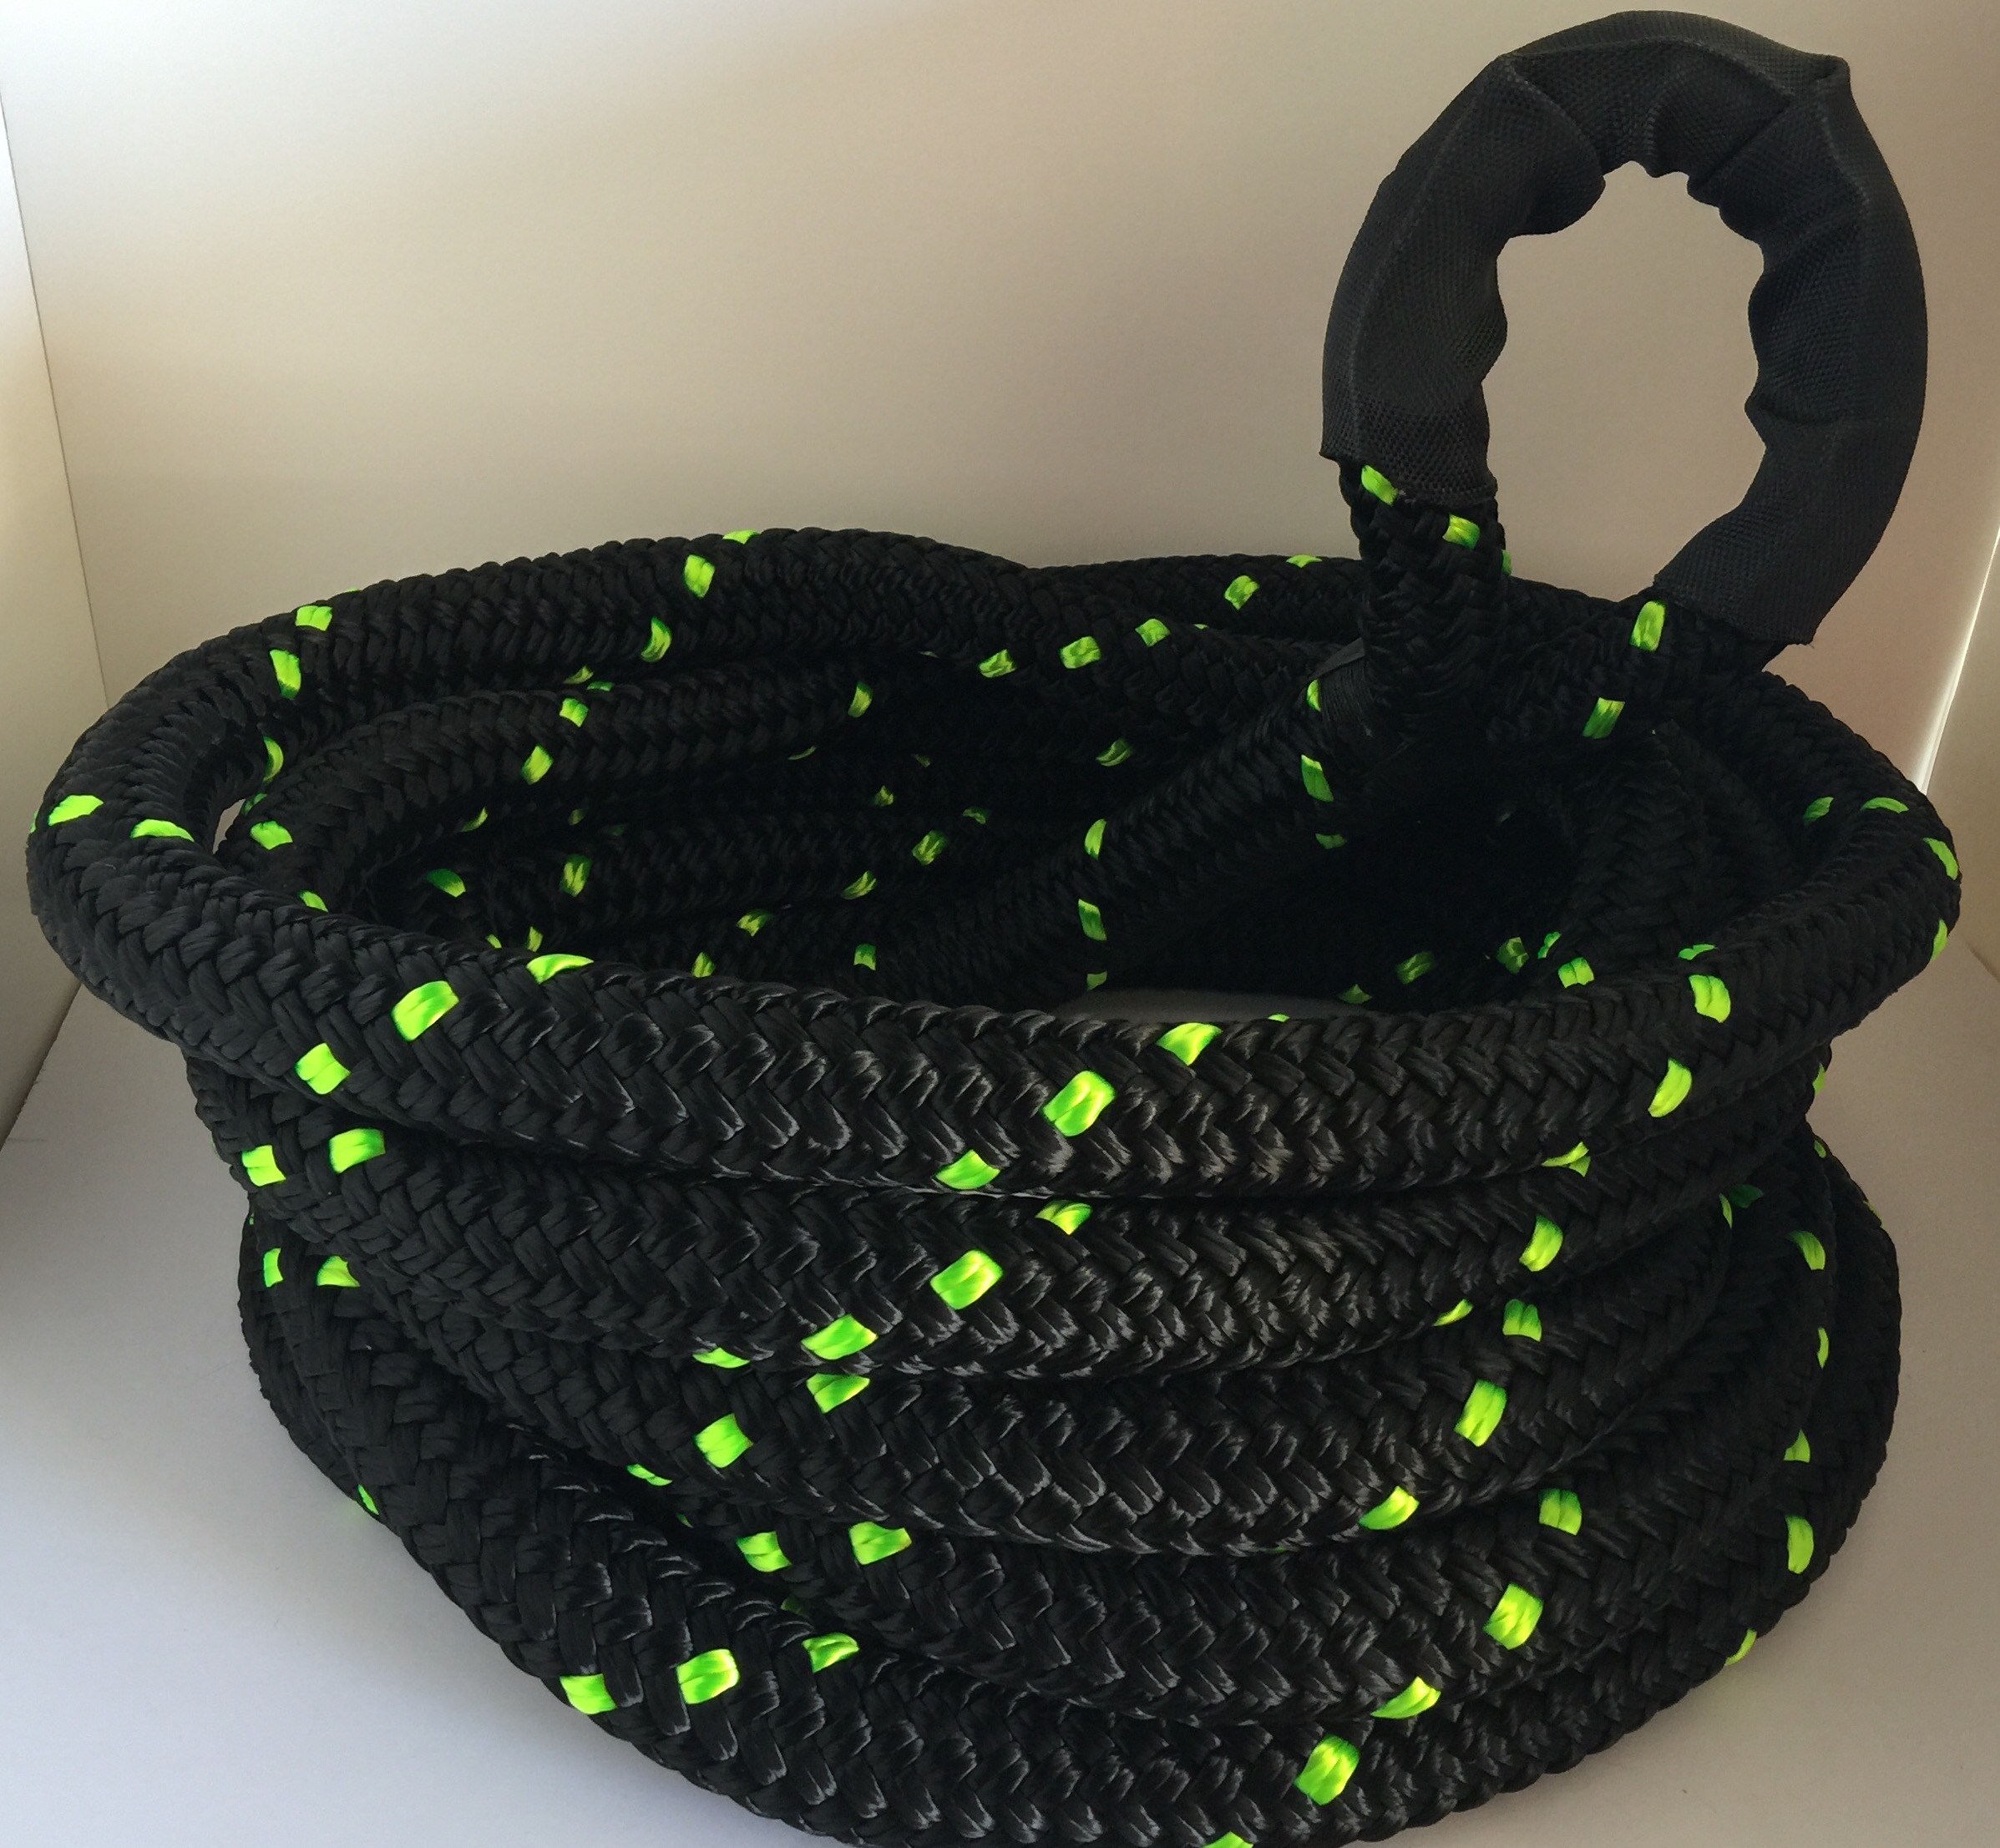 MONSTER RECOVERY ROPE (kinetic) - 1-1/2 inch X 30 ft (VEHICLE RECOVERY)